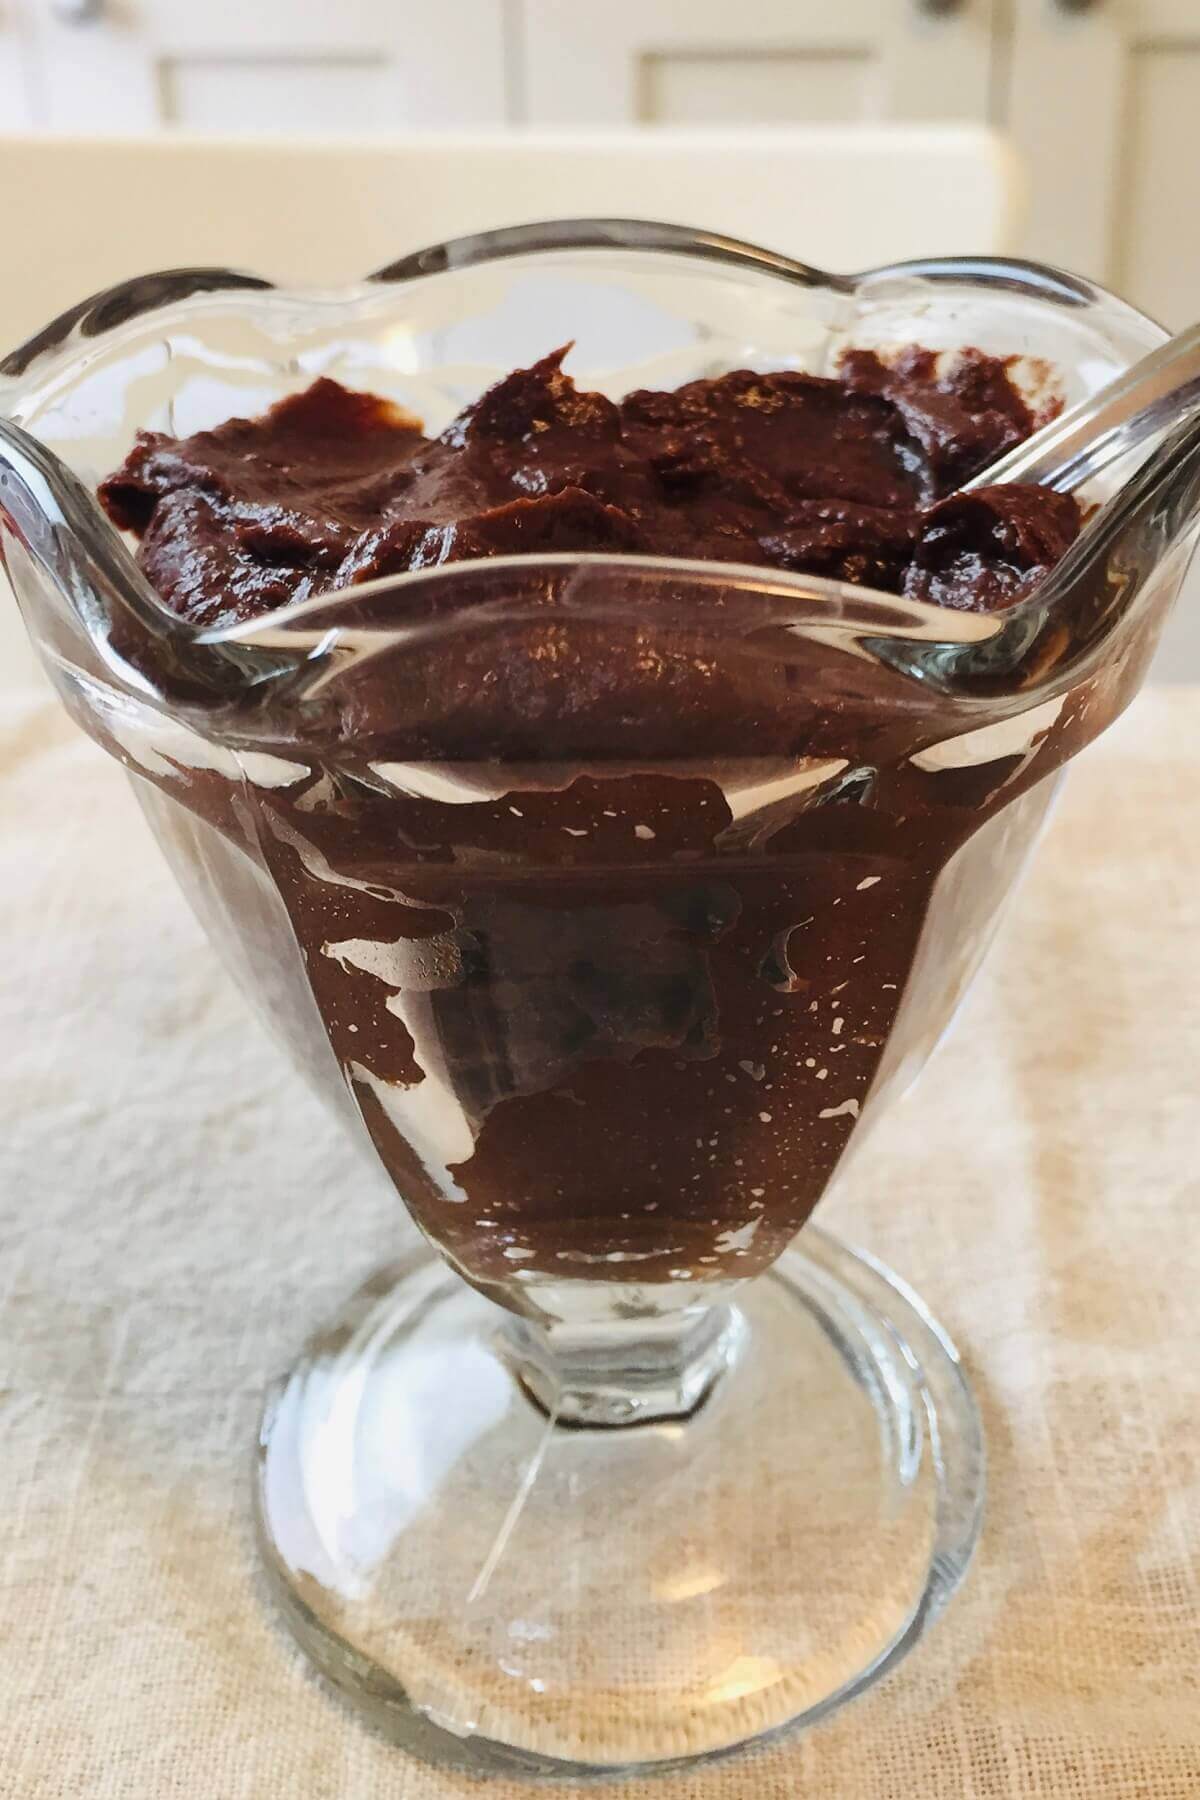 Pudding in a glass sundae dish.